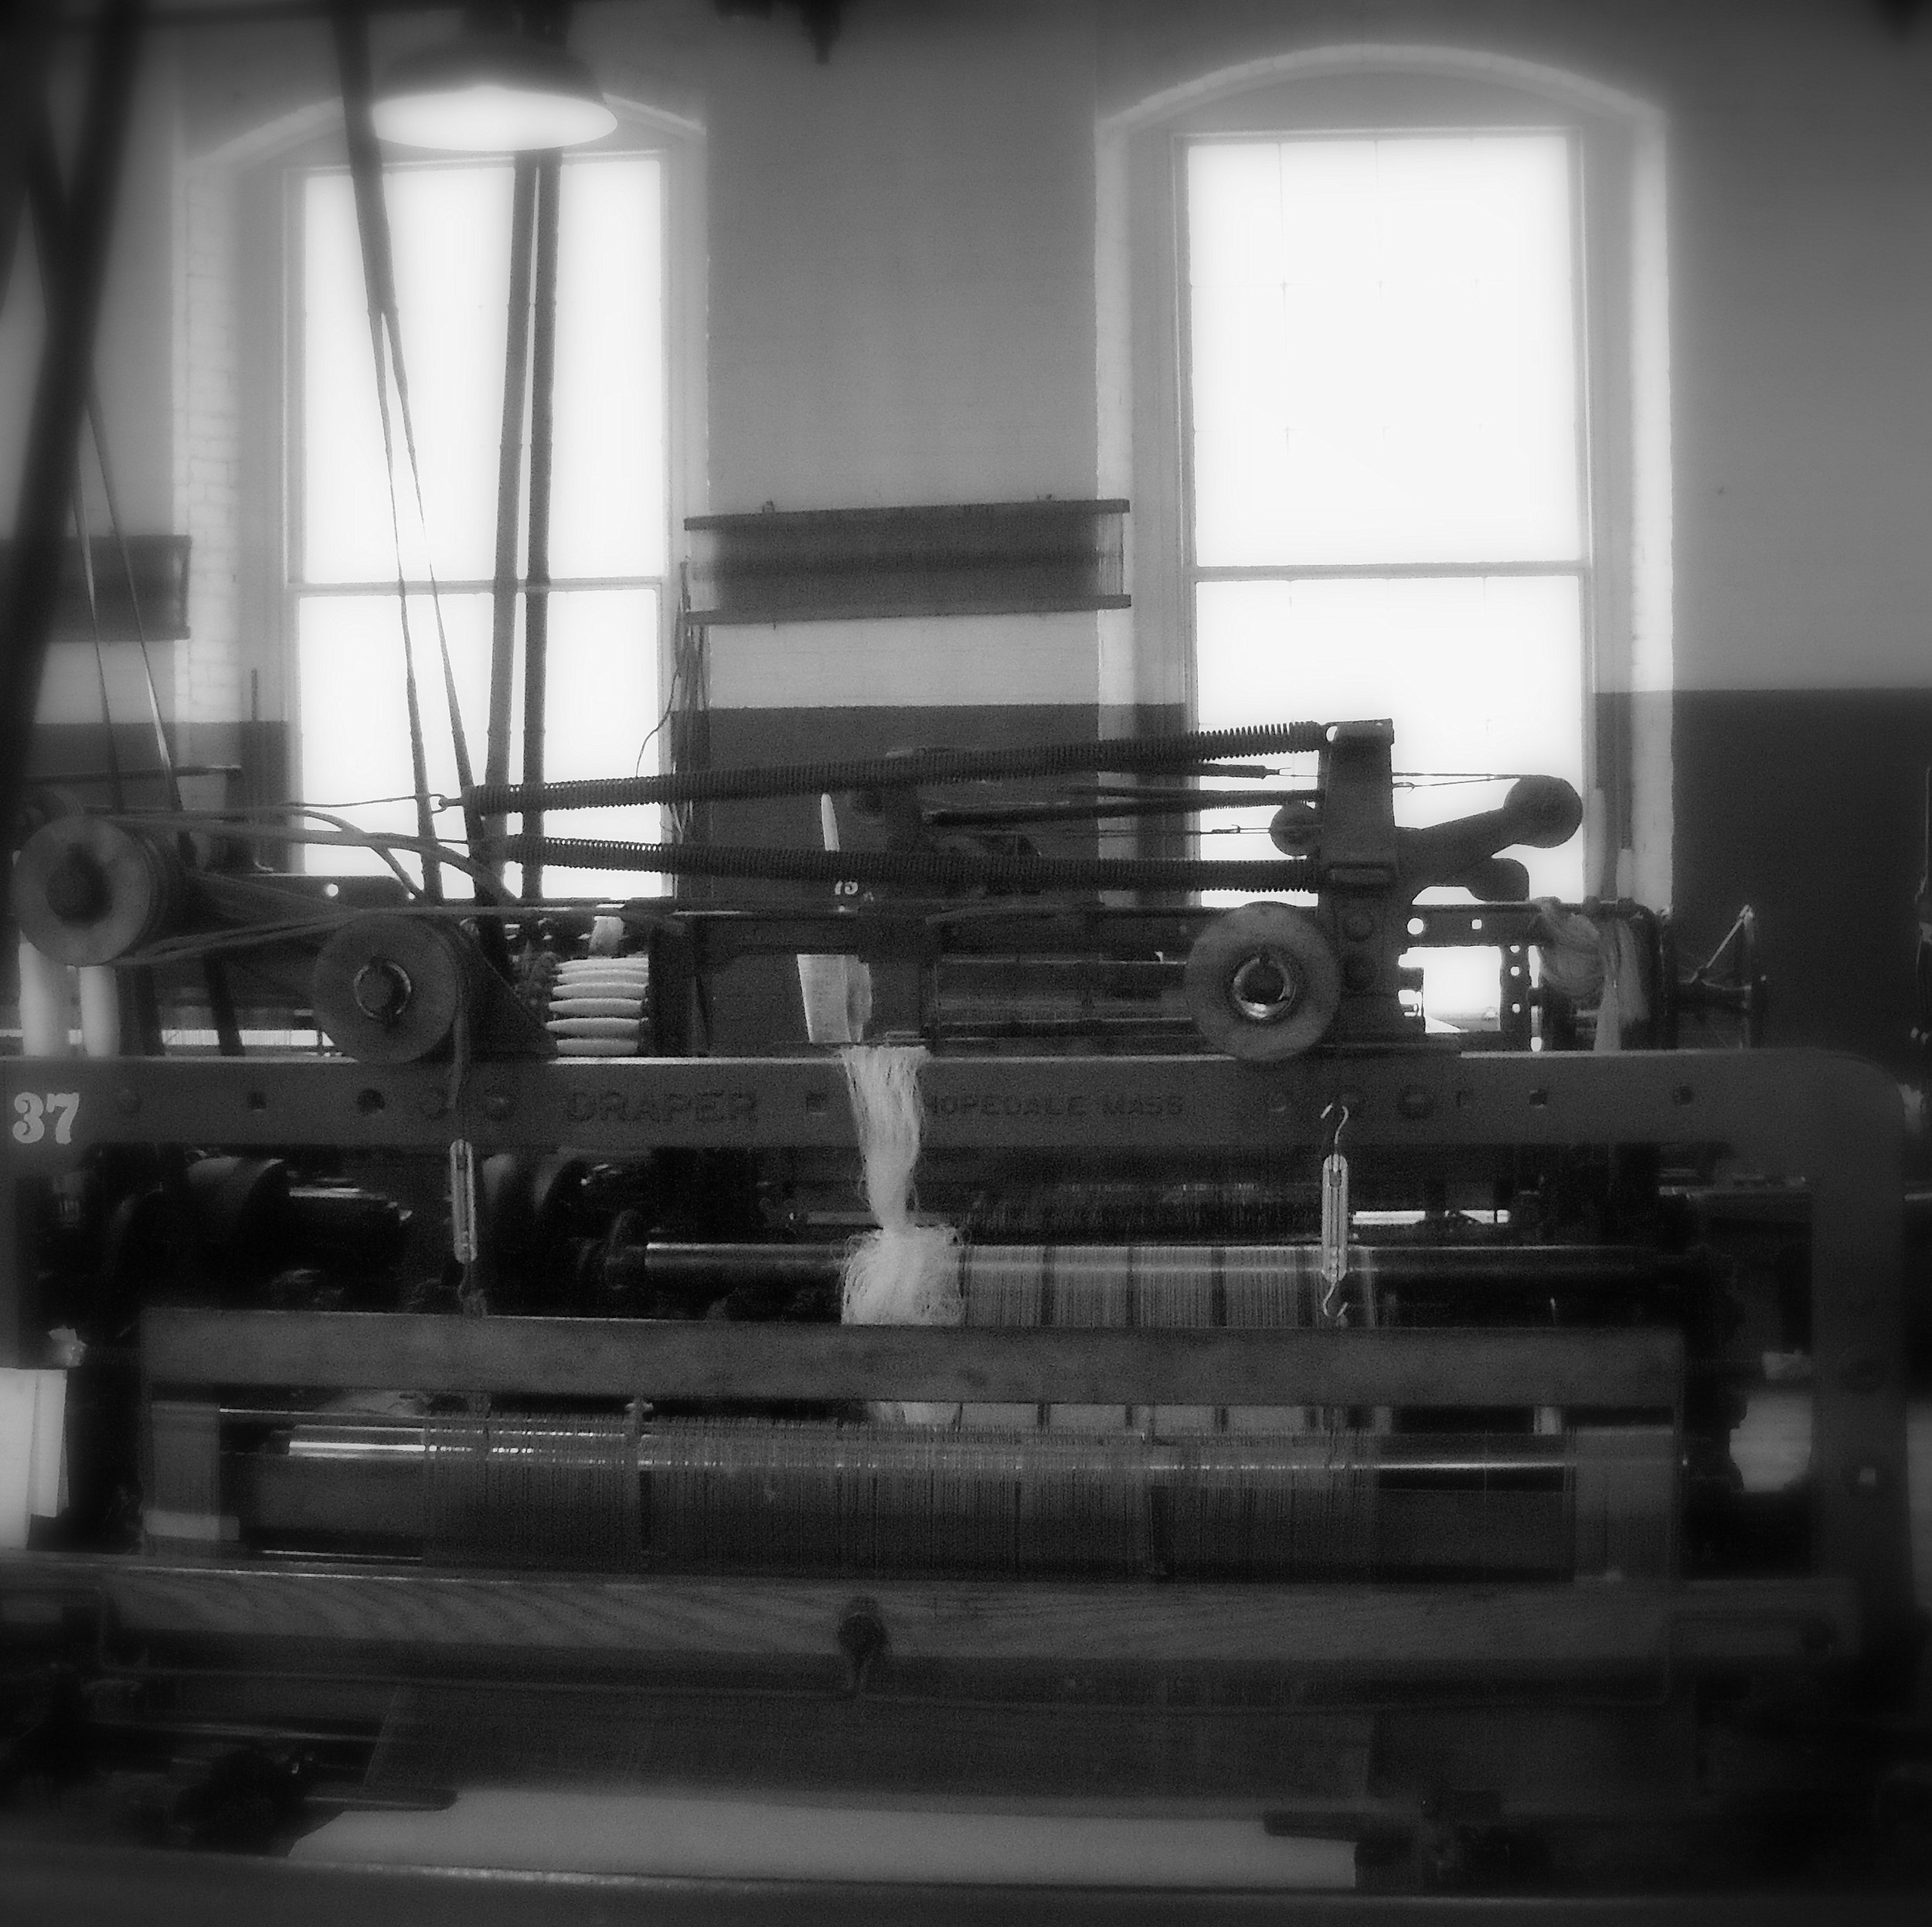 One of the Looms